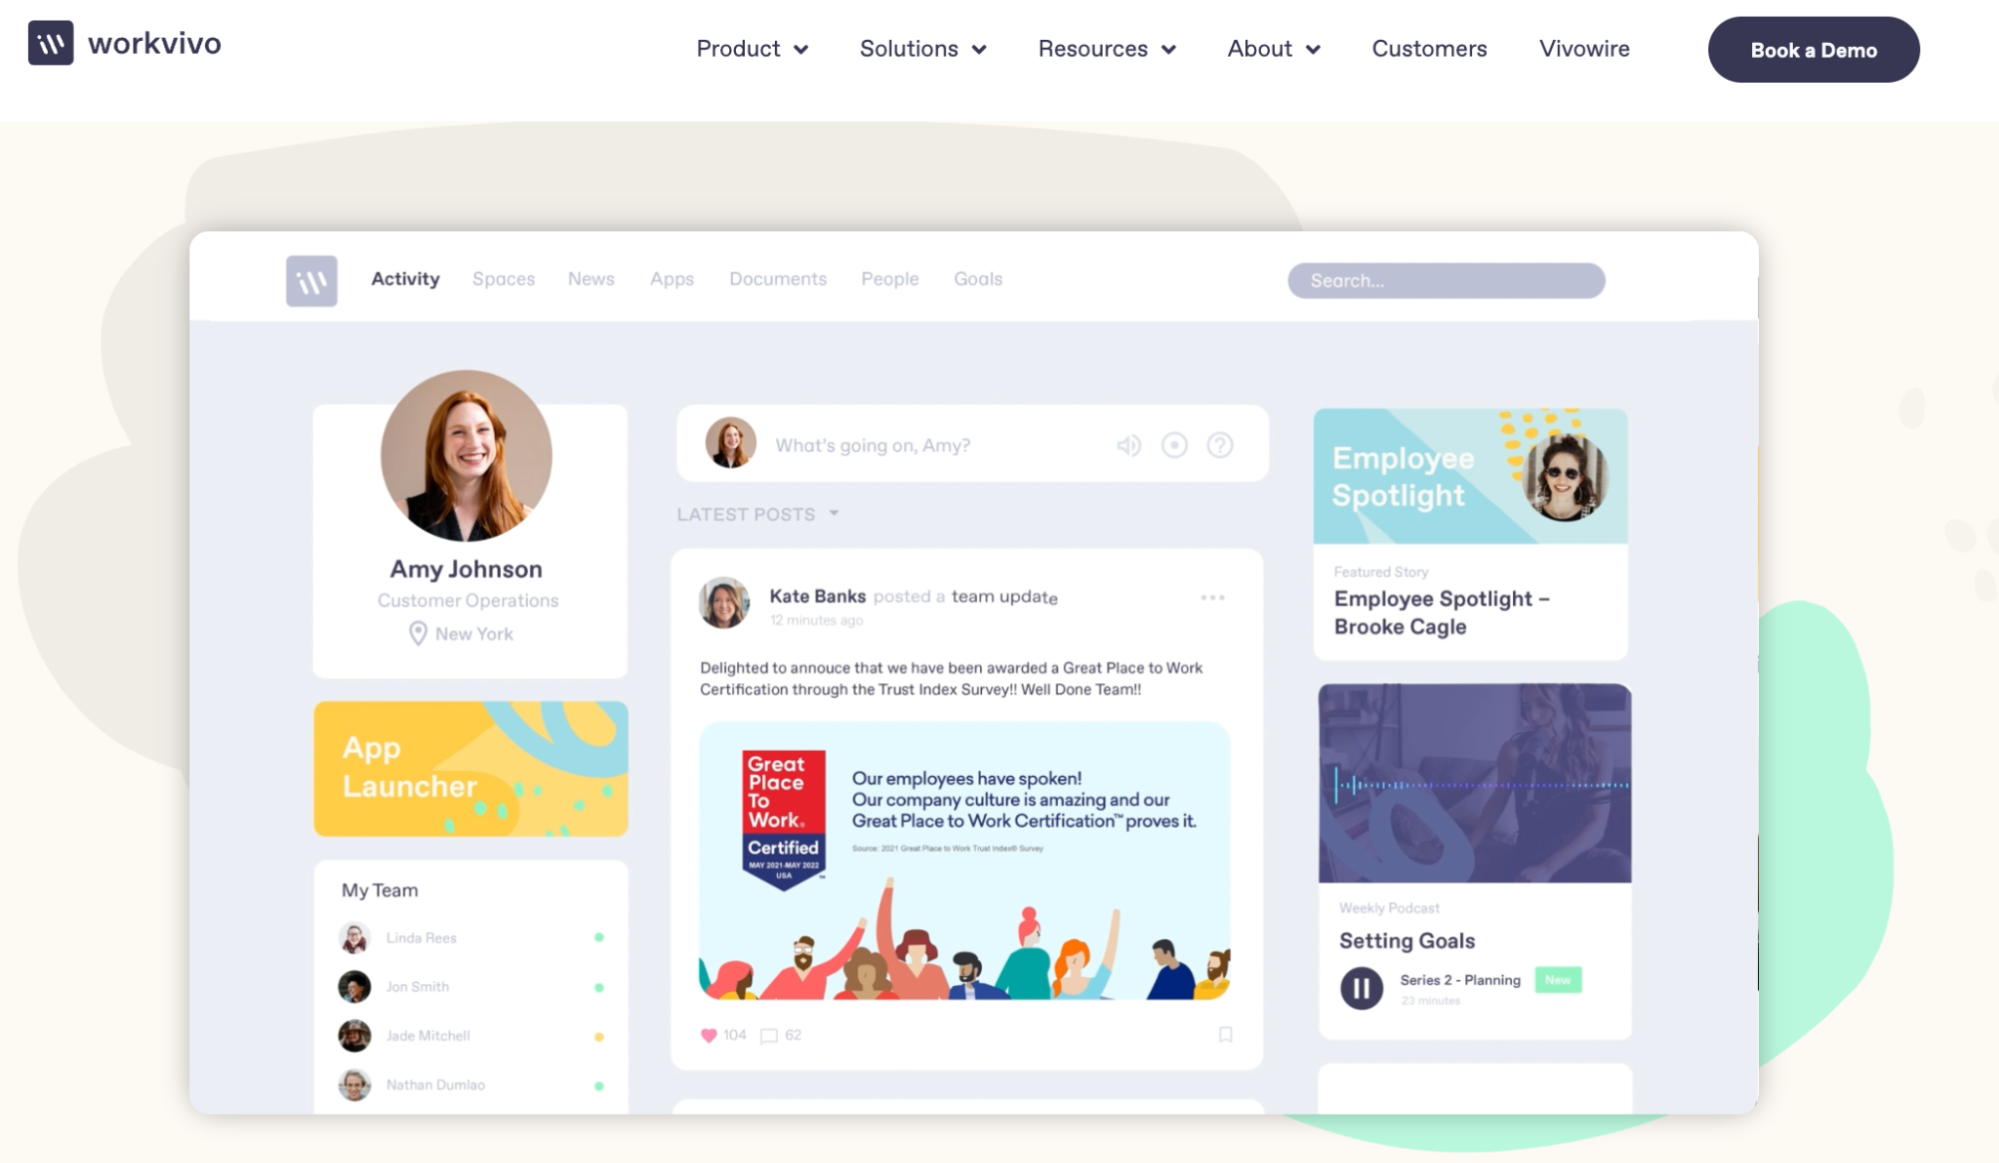 Workvivo's intranet software looks to build employee engagement and improve the employee experience